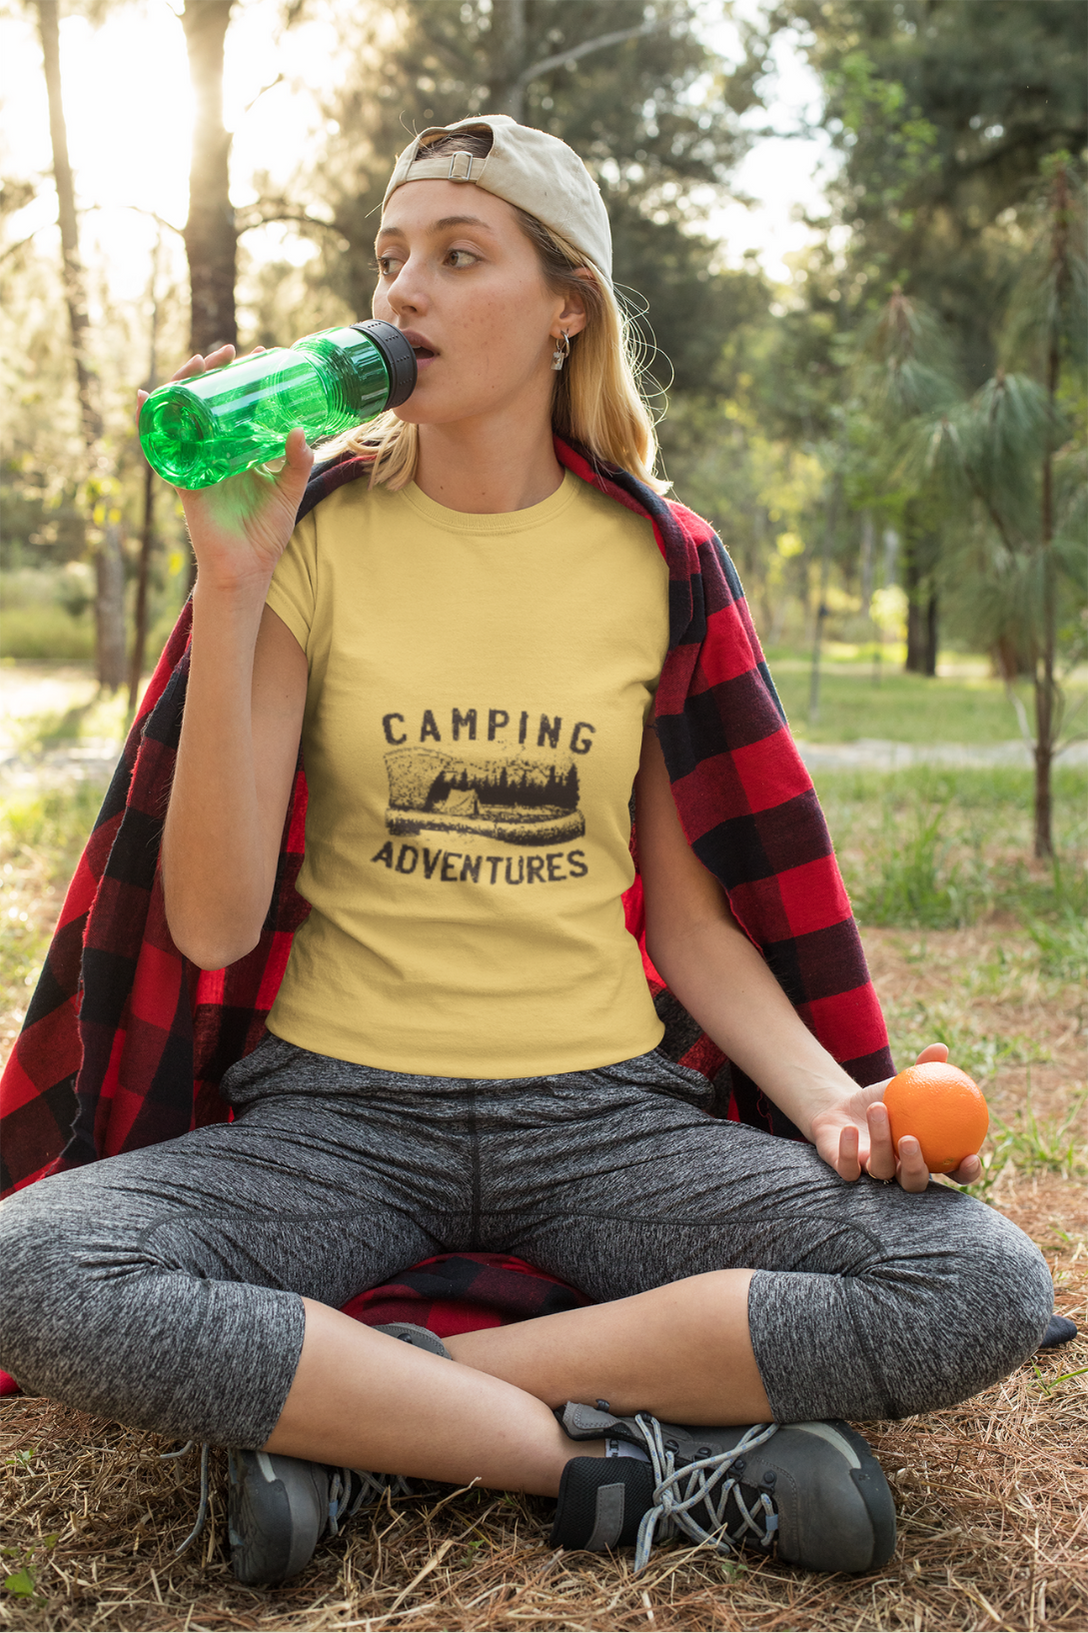 Camping Adventures Printed T-Shirt For Women - WowWaves